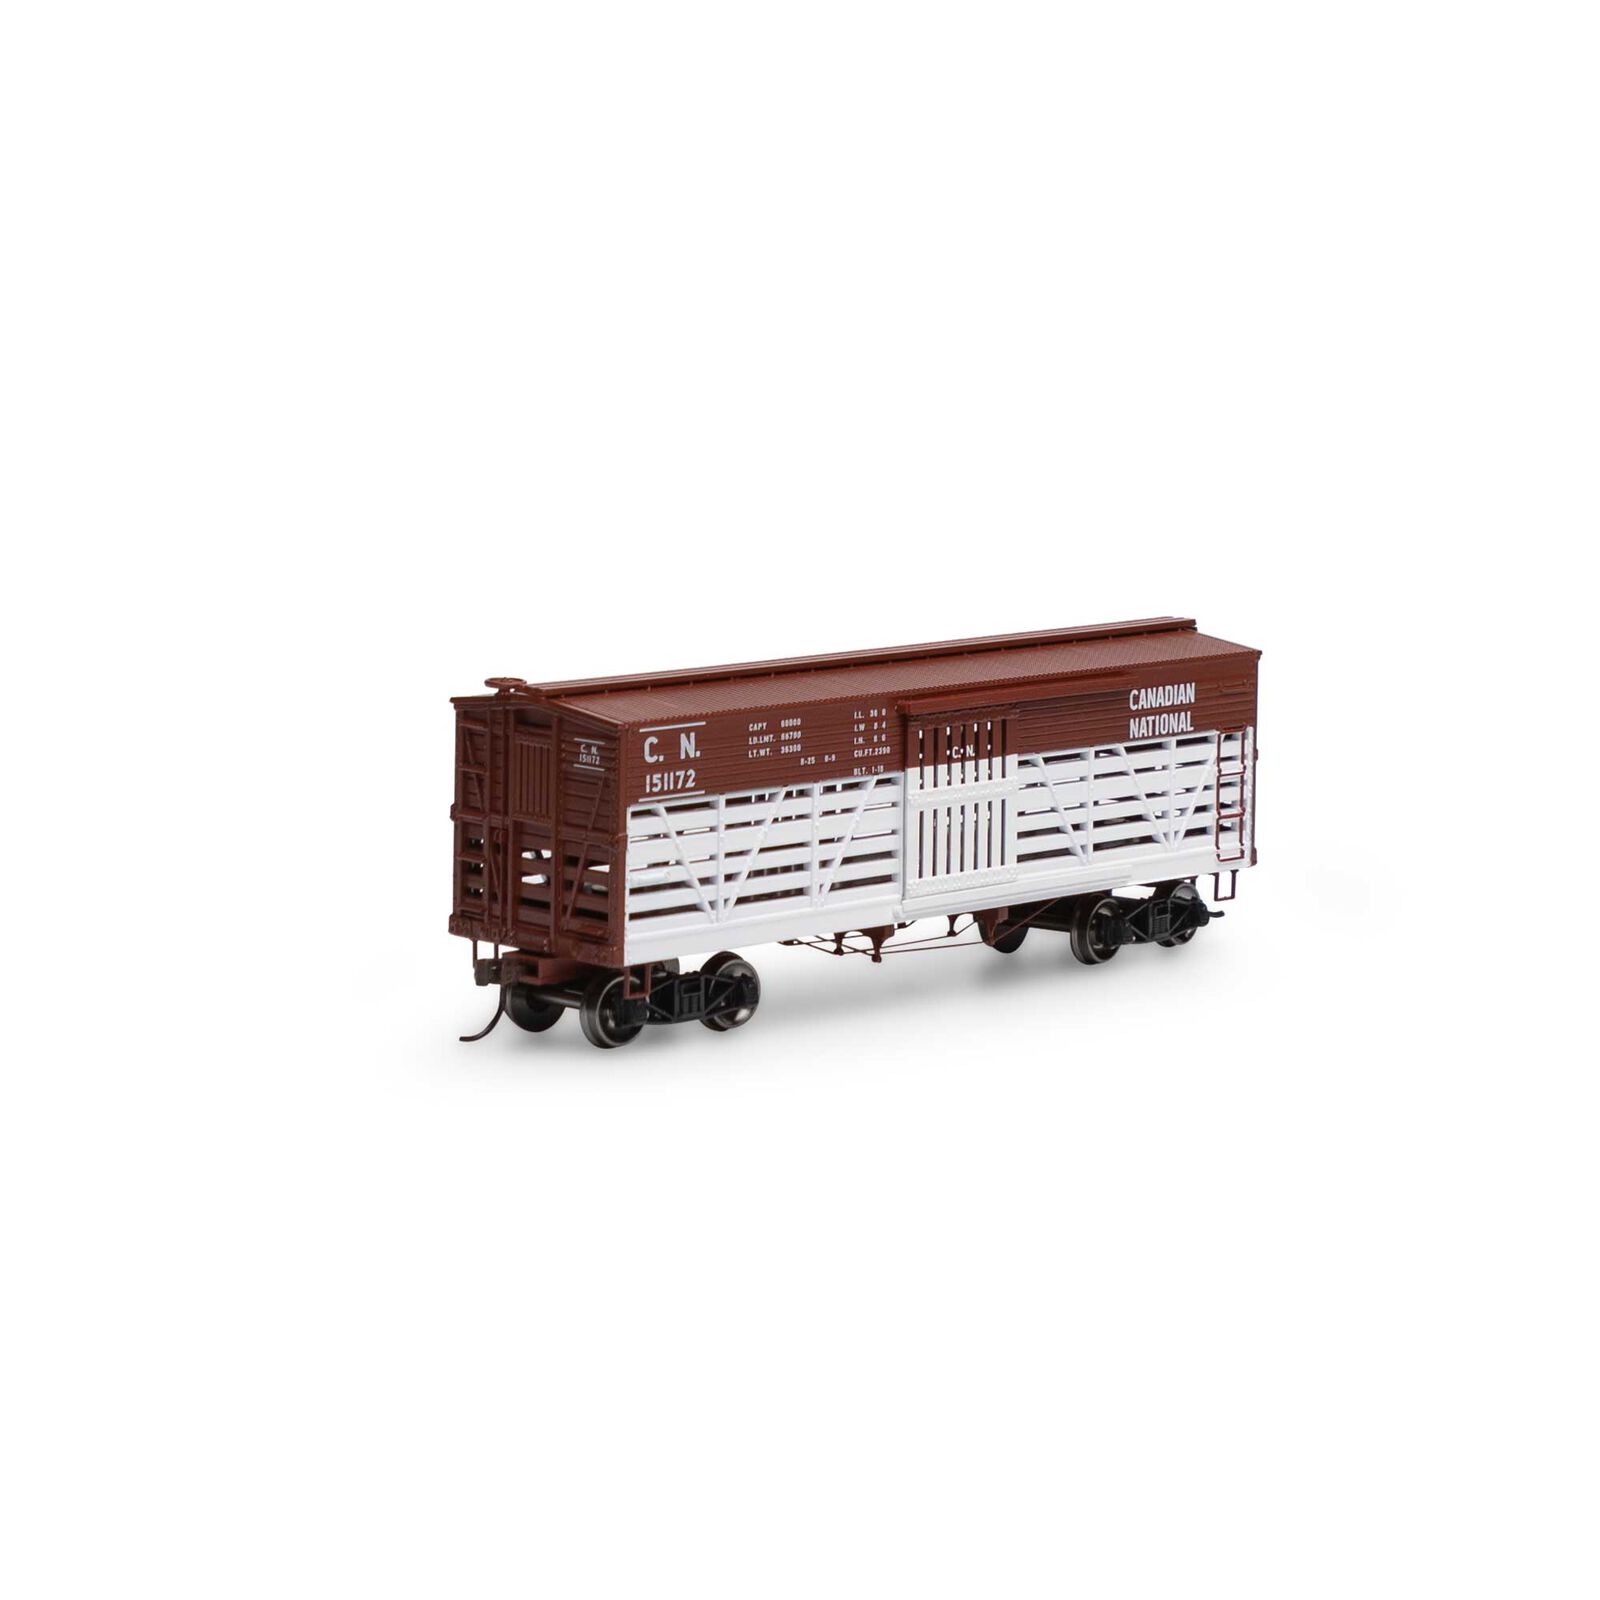 HO 36' Old Time Stock Car, CN #151172